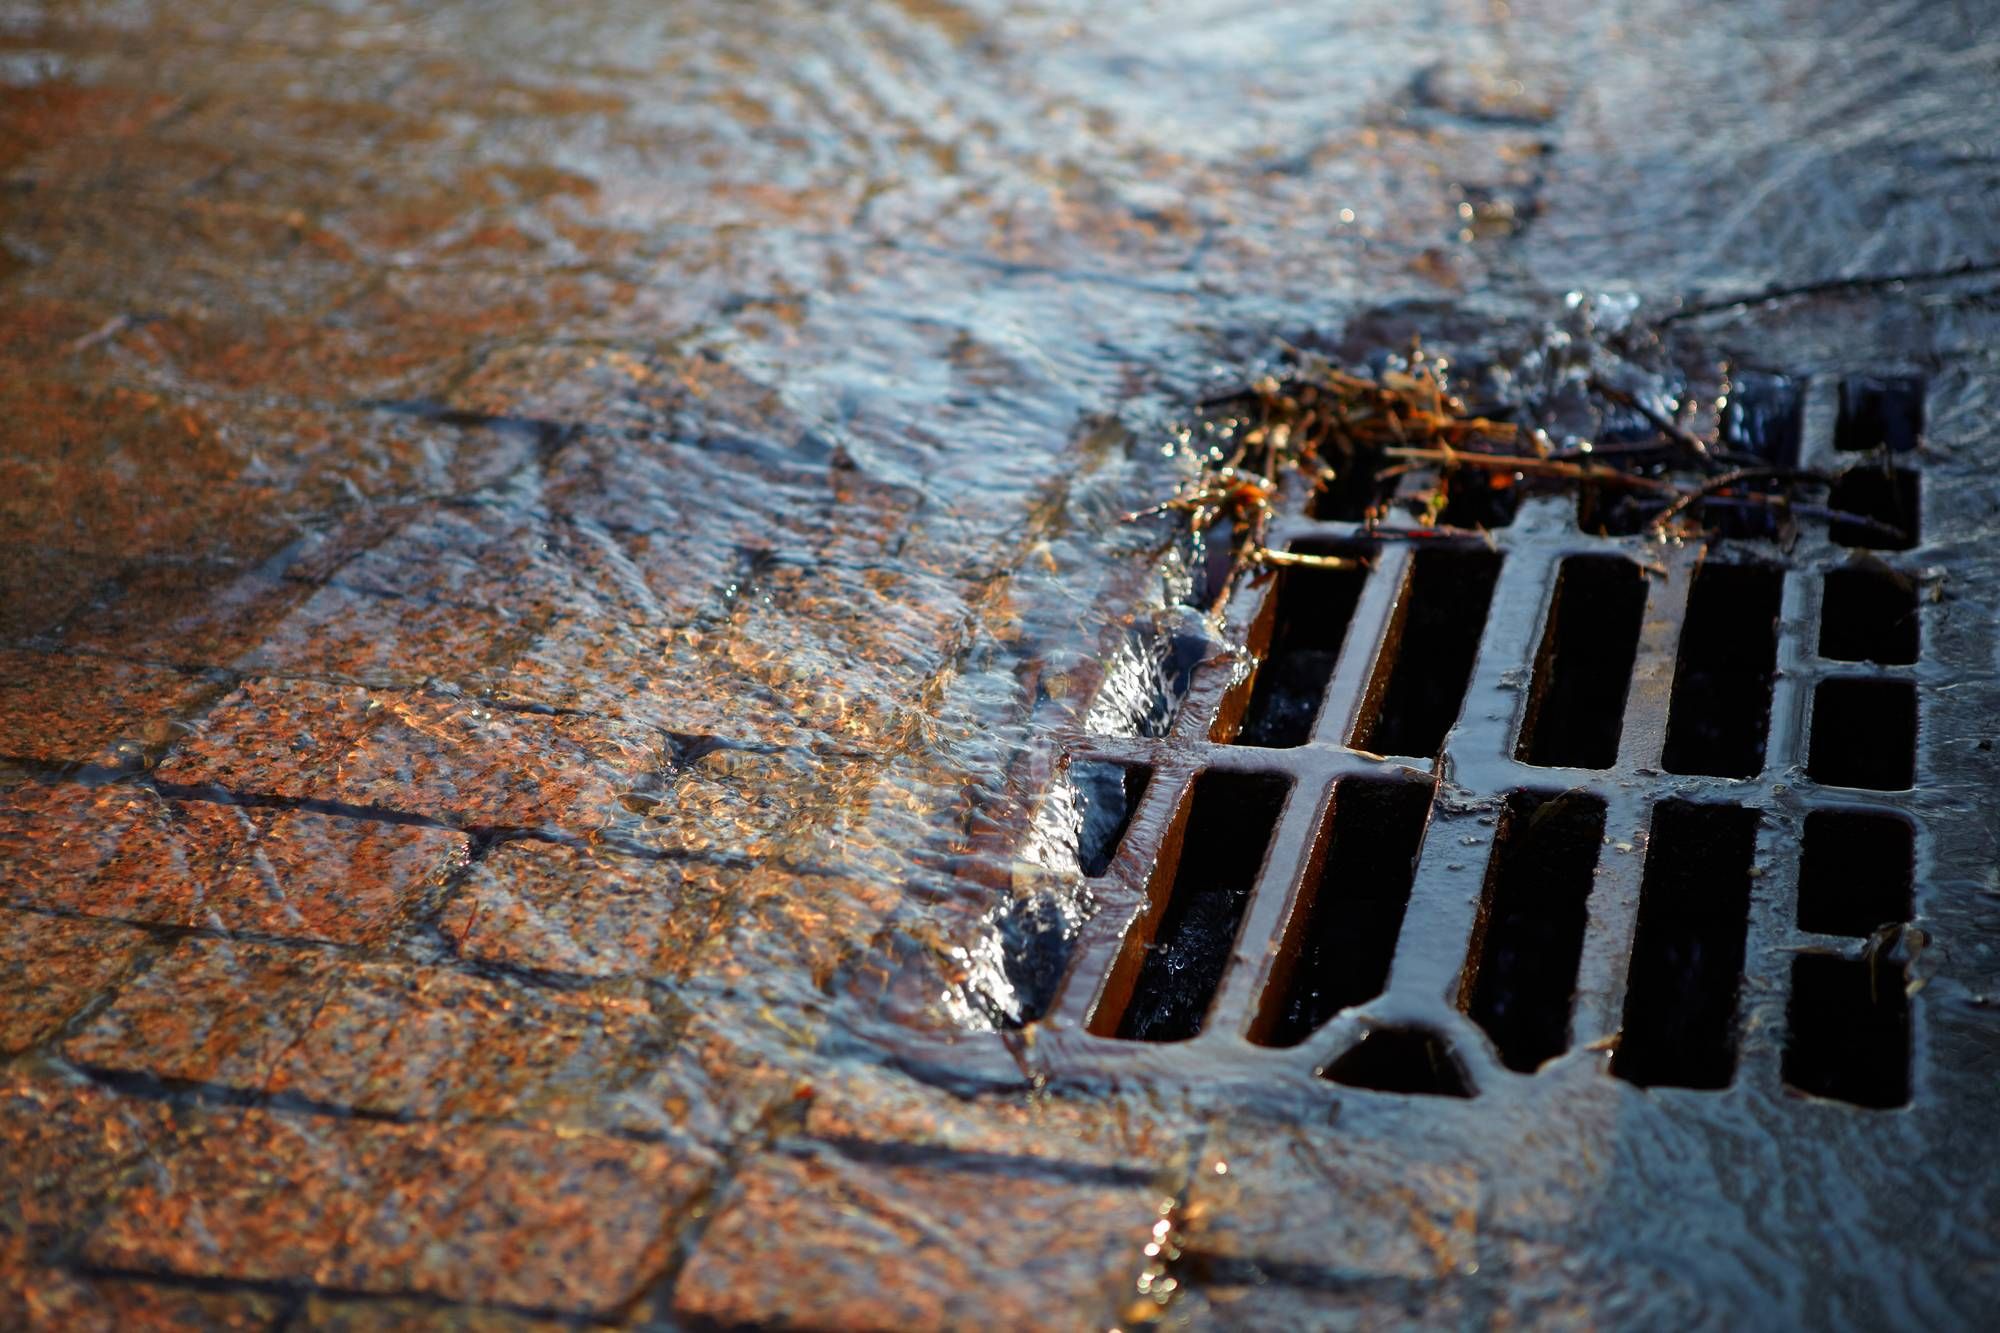 A St. Clair Shores stormwater class action settlement has been reached.